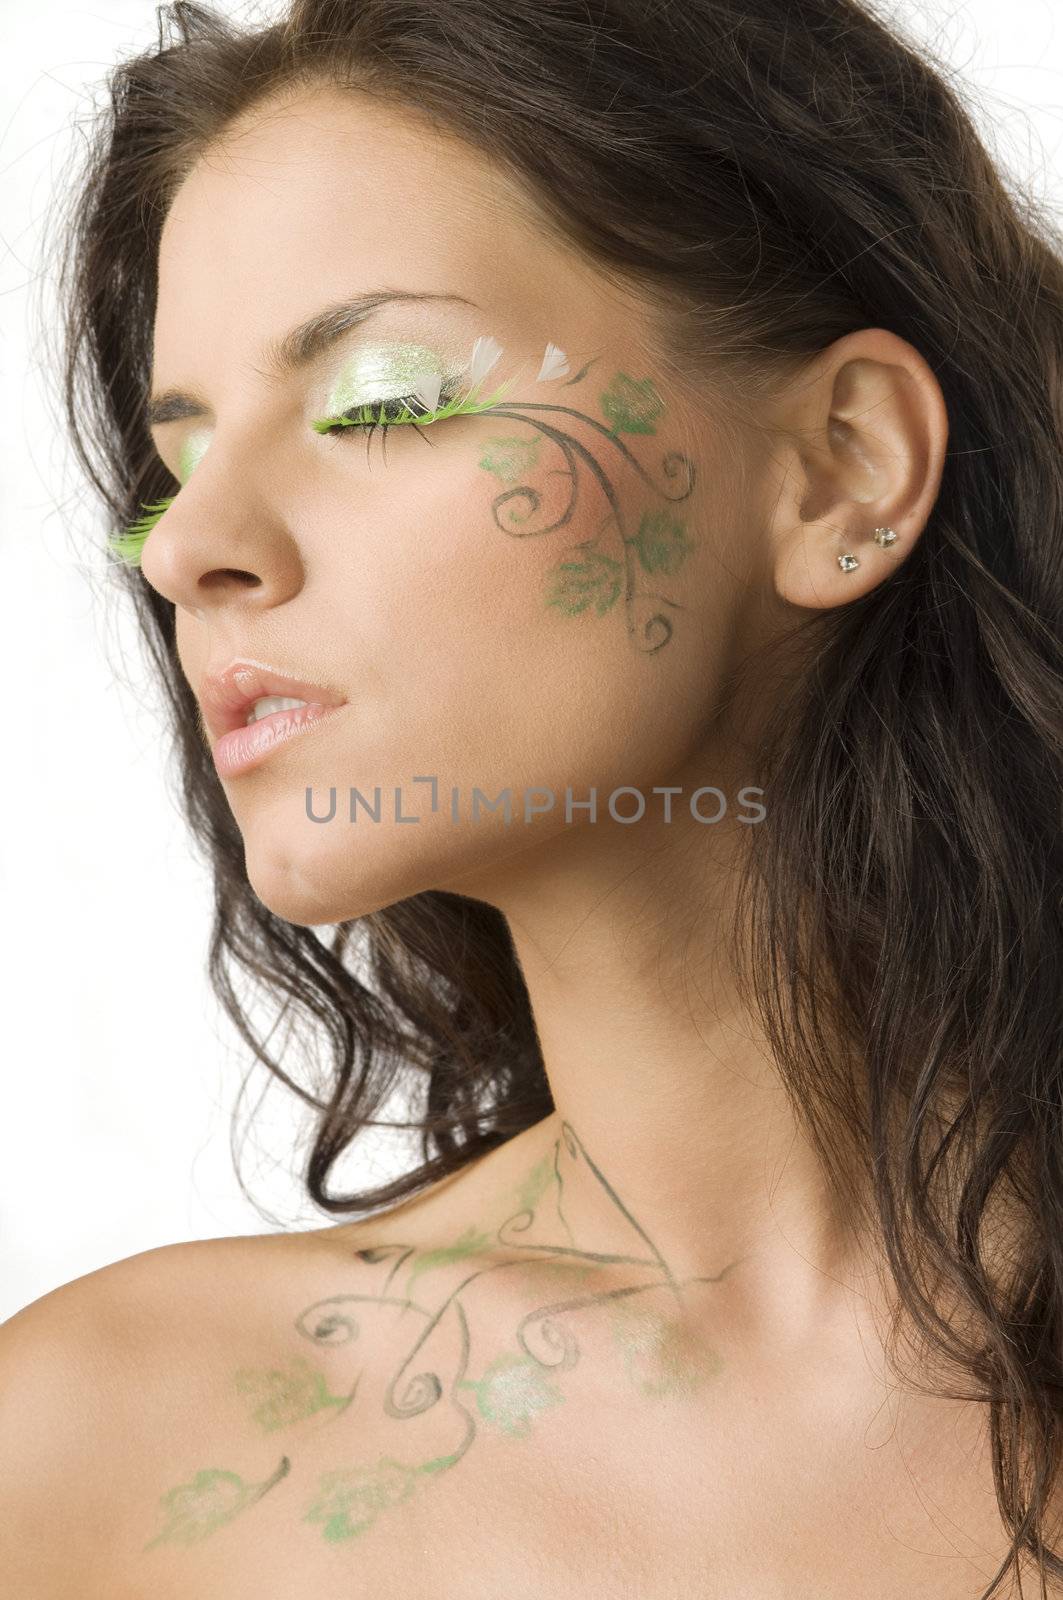 beautiful girl with body paint on her face and shoulder keeping her eyes closed